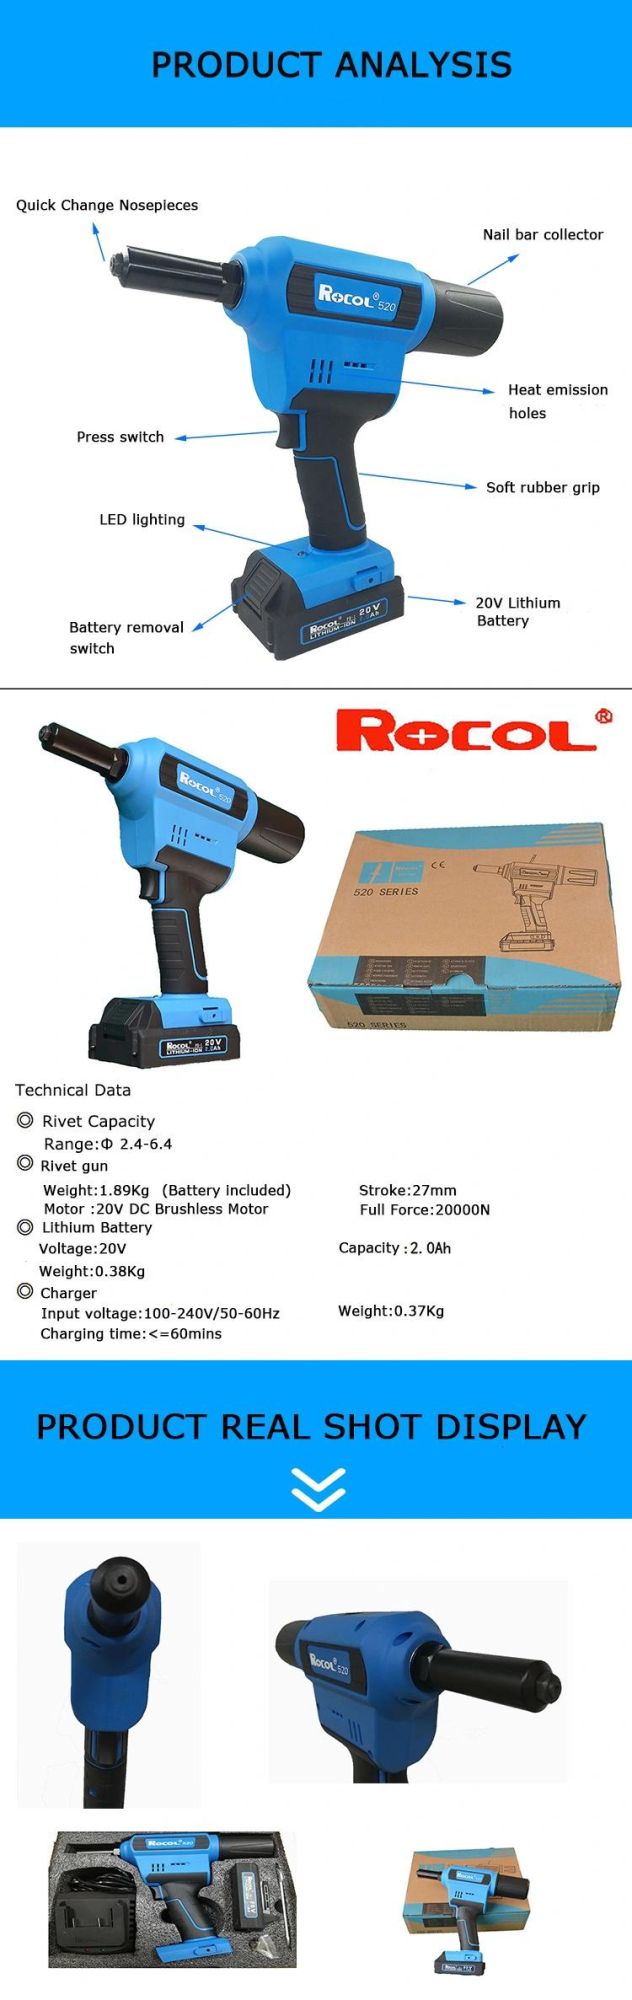 Large Pull Force 2.4-6.4 Lithium Battery Pop Riveting Tool